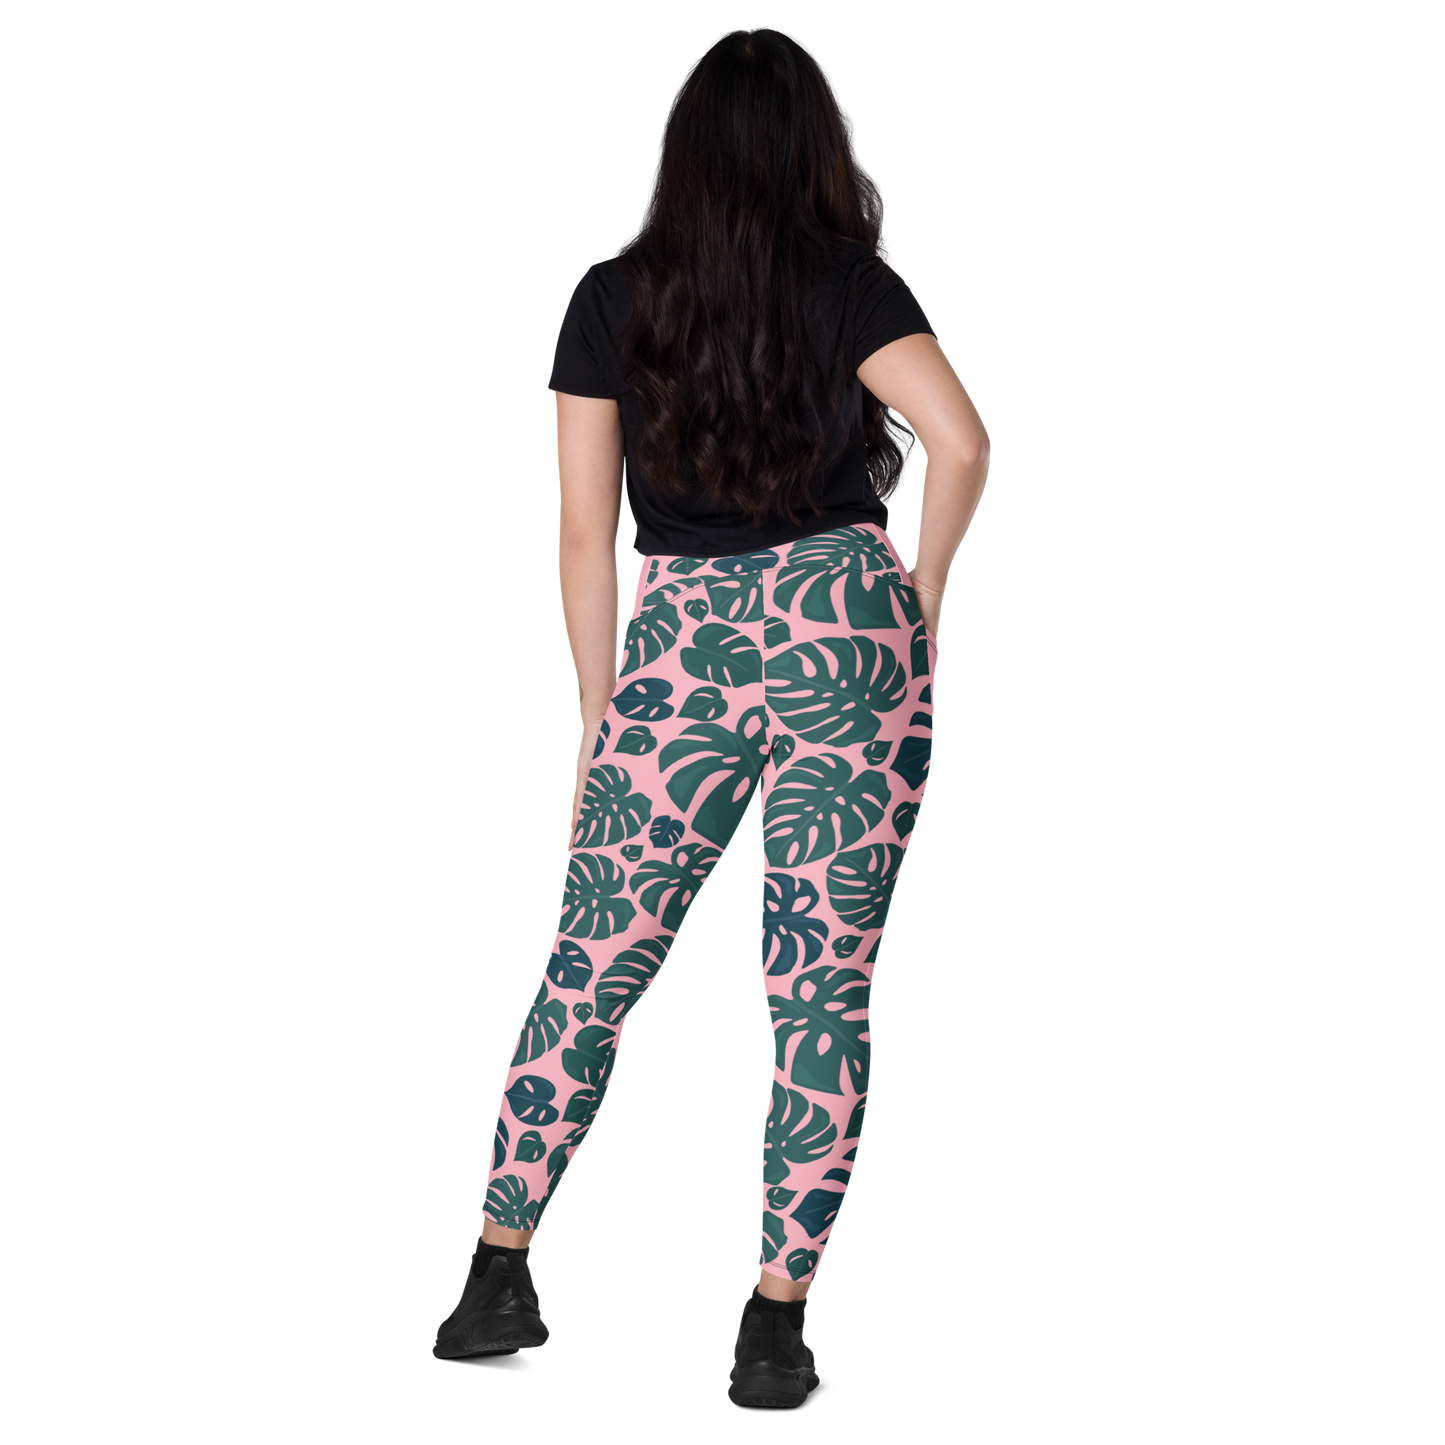 Monstera Crossover leggings with pockets